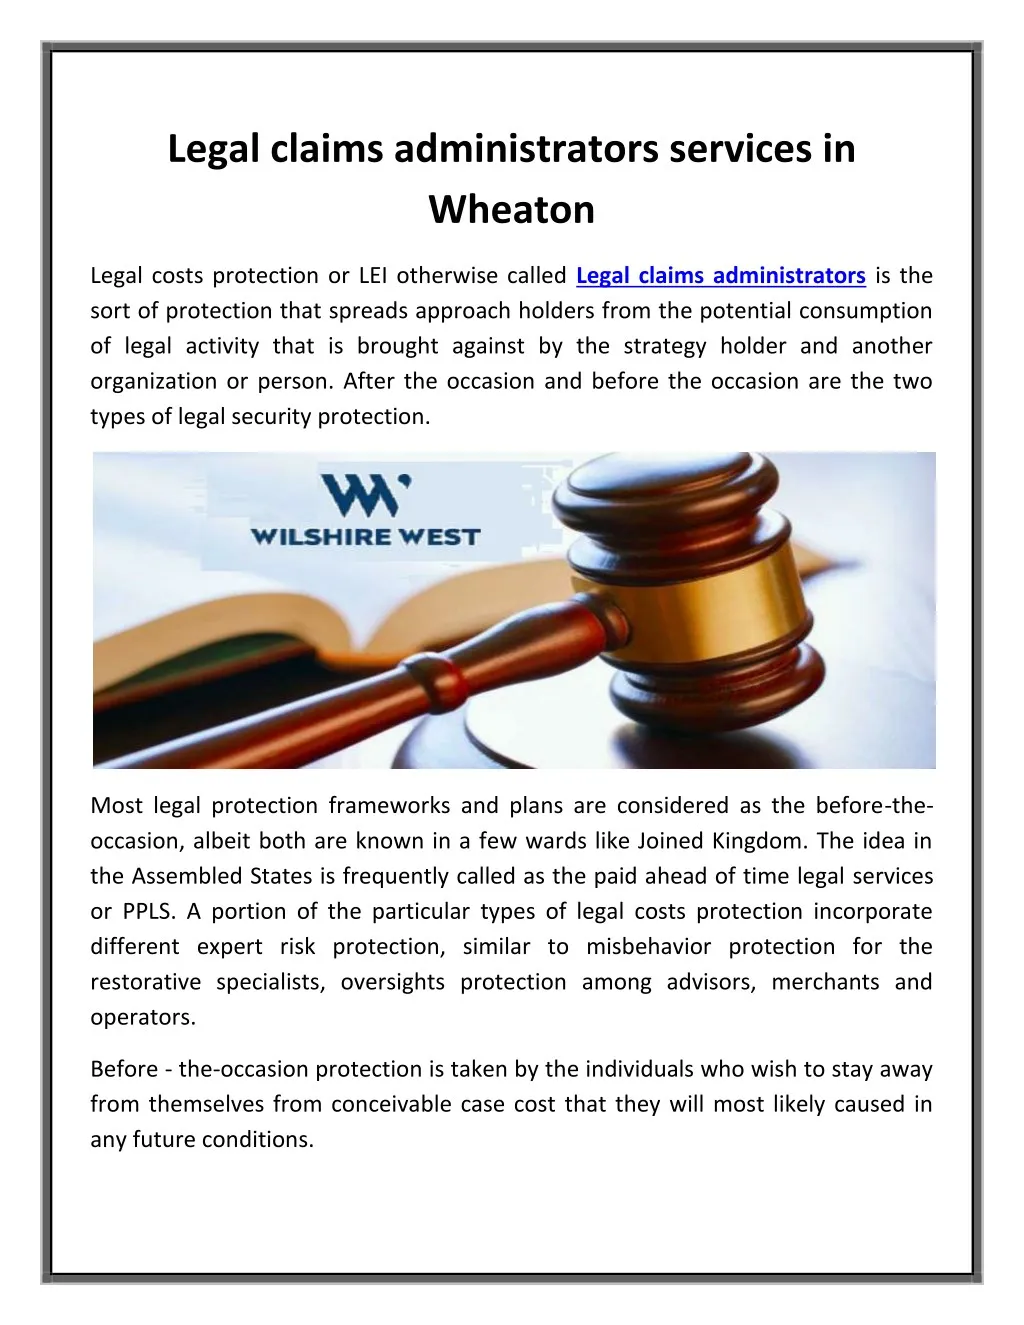 legal claims administrators services in wheaton